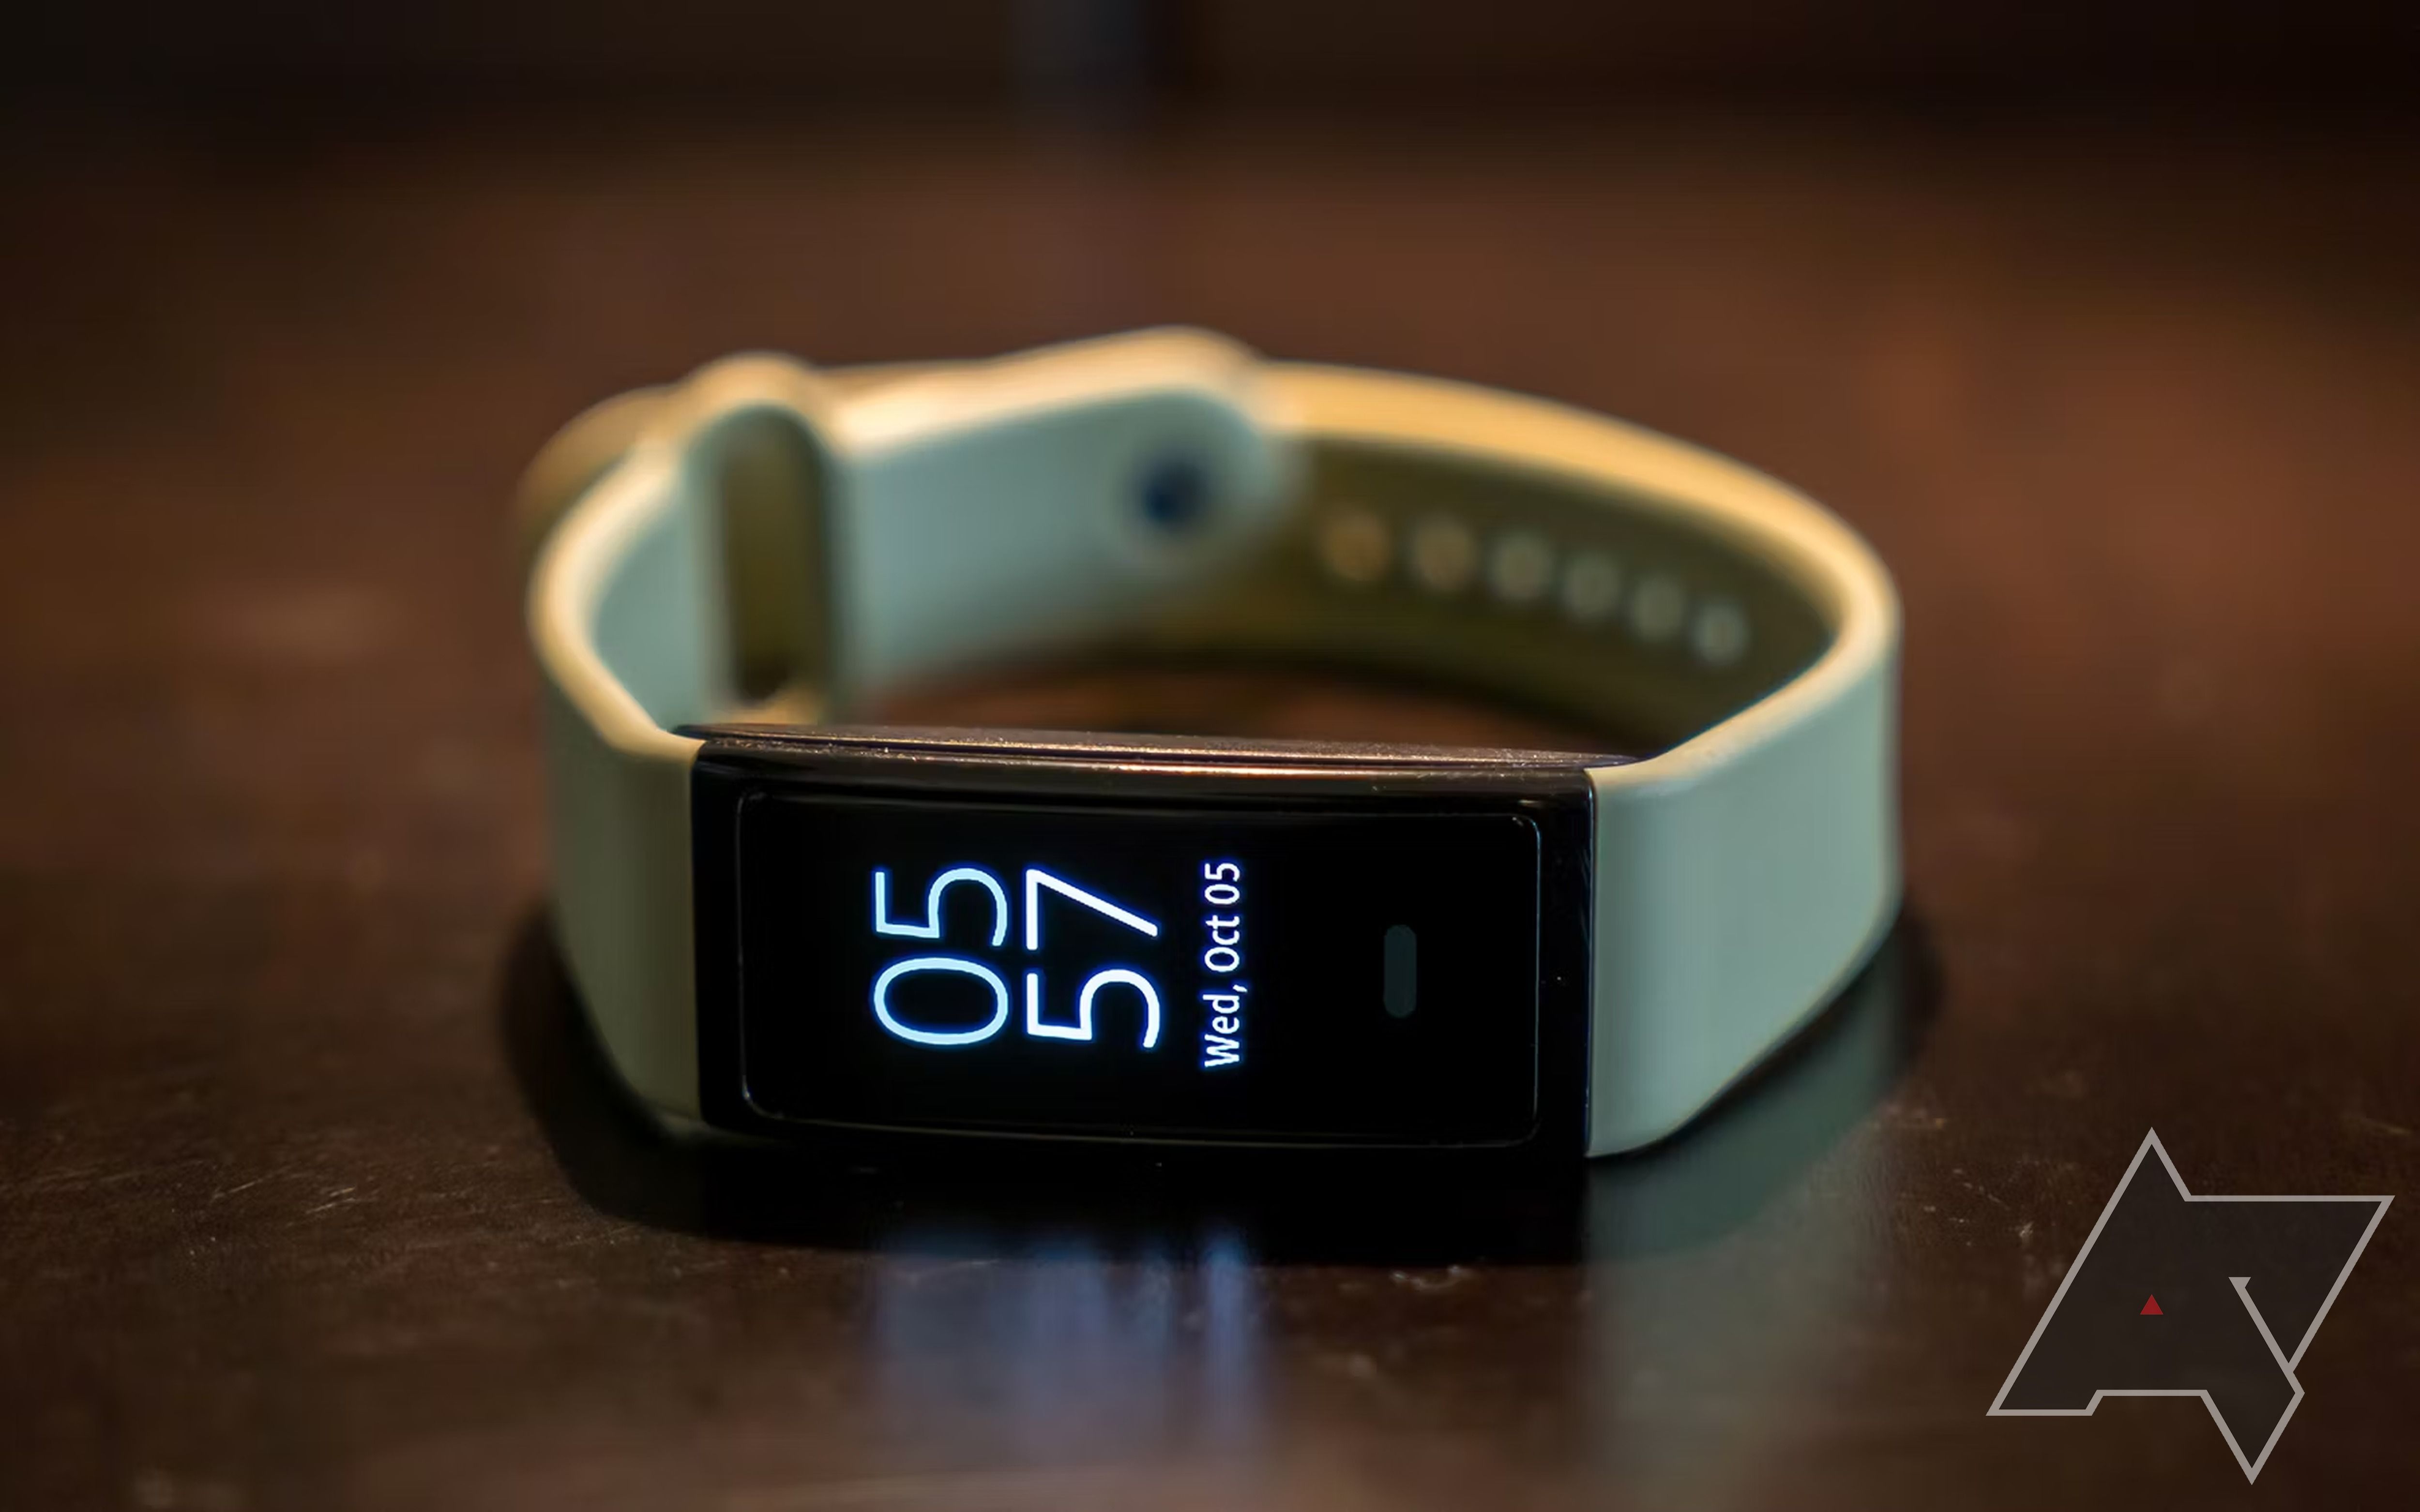 Halo View review: A lightweight fitness tracker tied to a